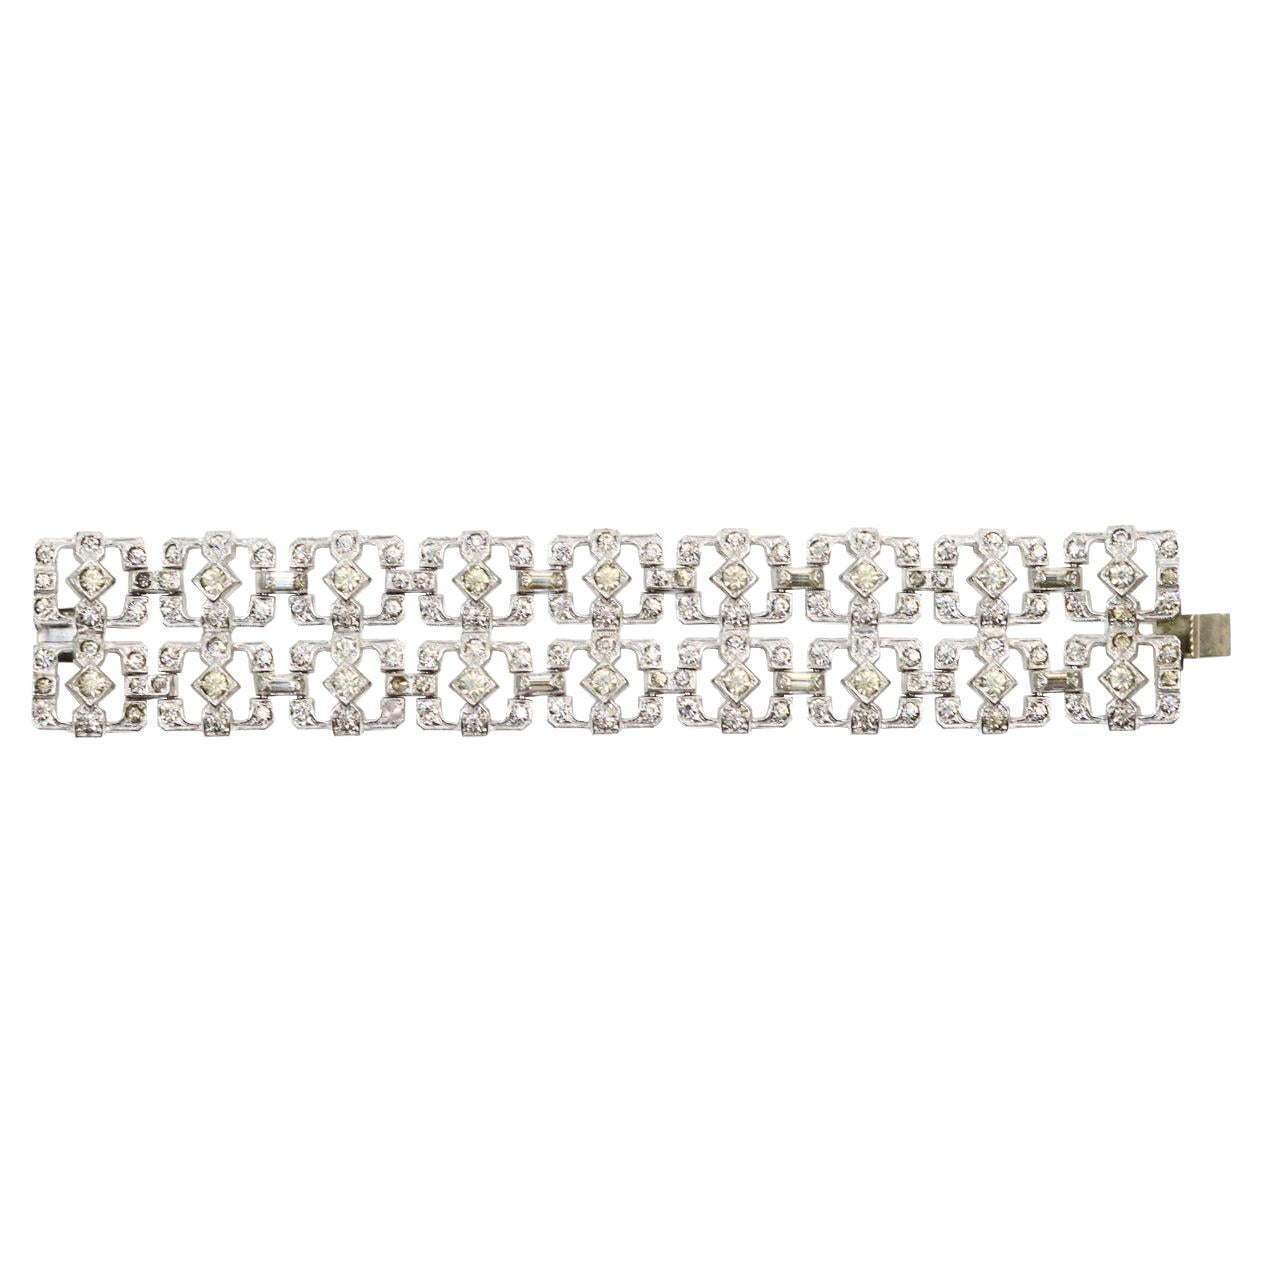 Vintage Art Deco Rhinestone Double Row Bracelet Circa 1960s. Well Made Double Row construction of square boxes make up the pretty bracelet. There are baguettes and round stones that make this bracelet.  I have listed 1960s but this is from the